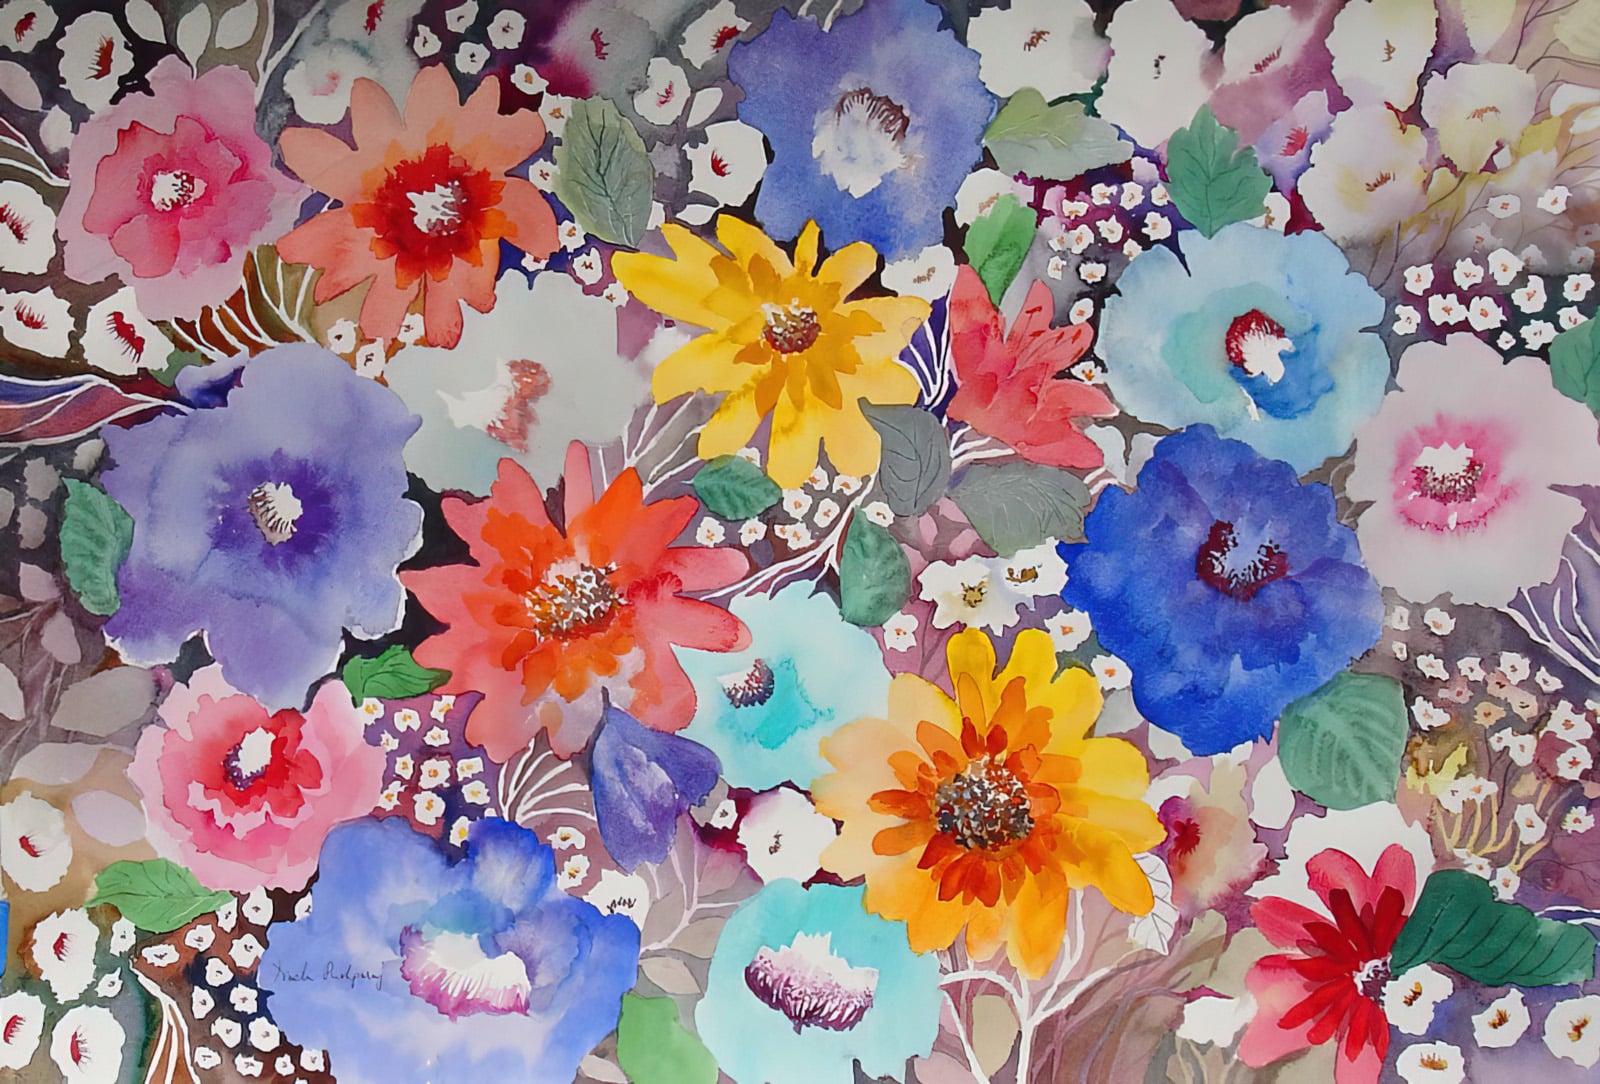 "Floral Quilt" Watercolor On 140 lbs Arches Paper.15x22in by Neela Pushparaj